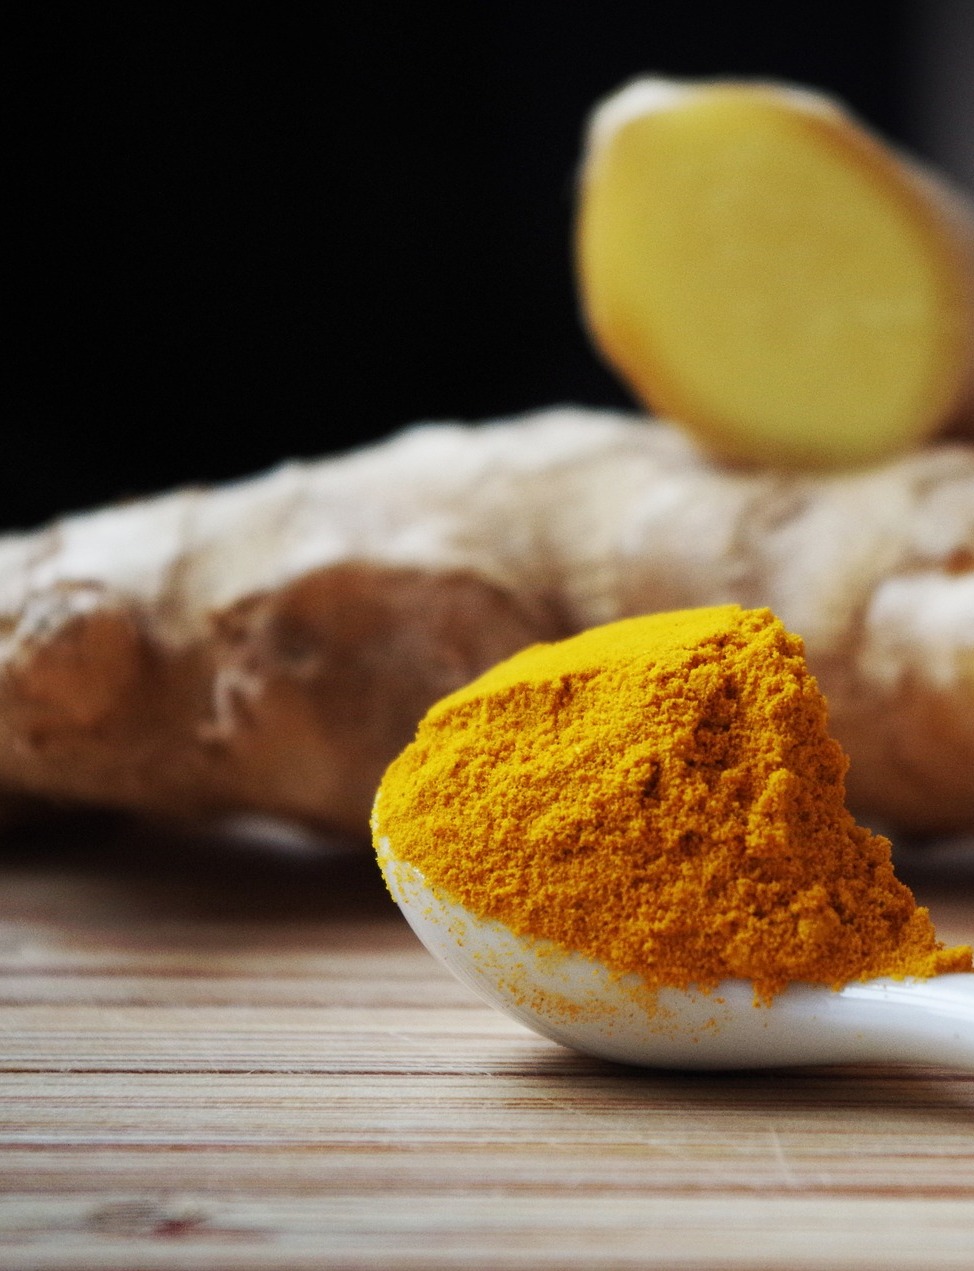 Learn how to use Turmeric daily 